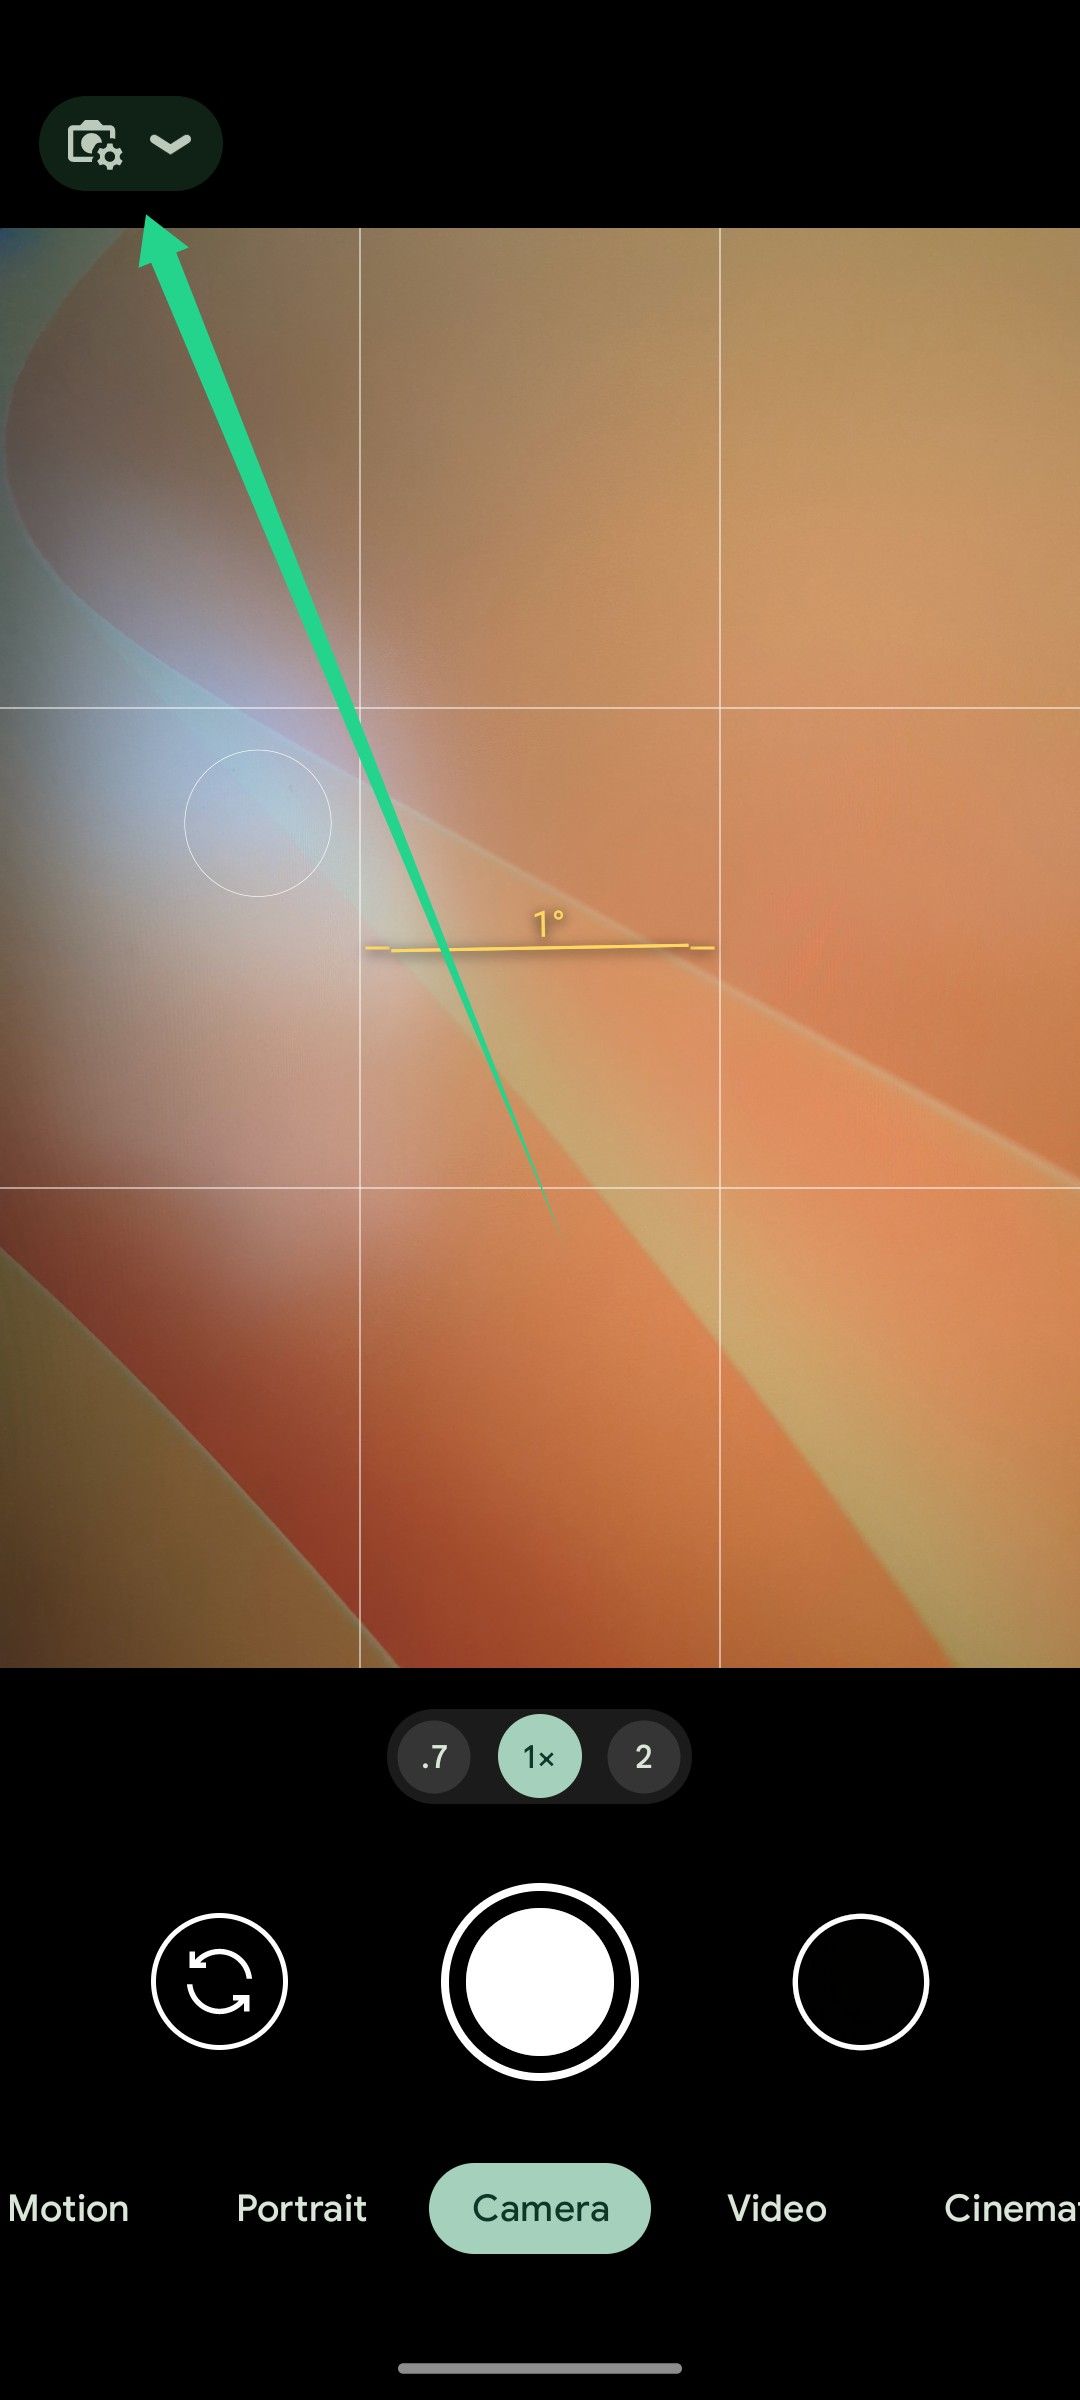 A Pixel phone's camera viewfinder with an arrow pointing to the settings icon.